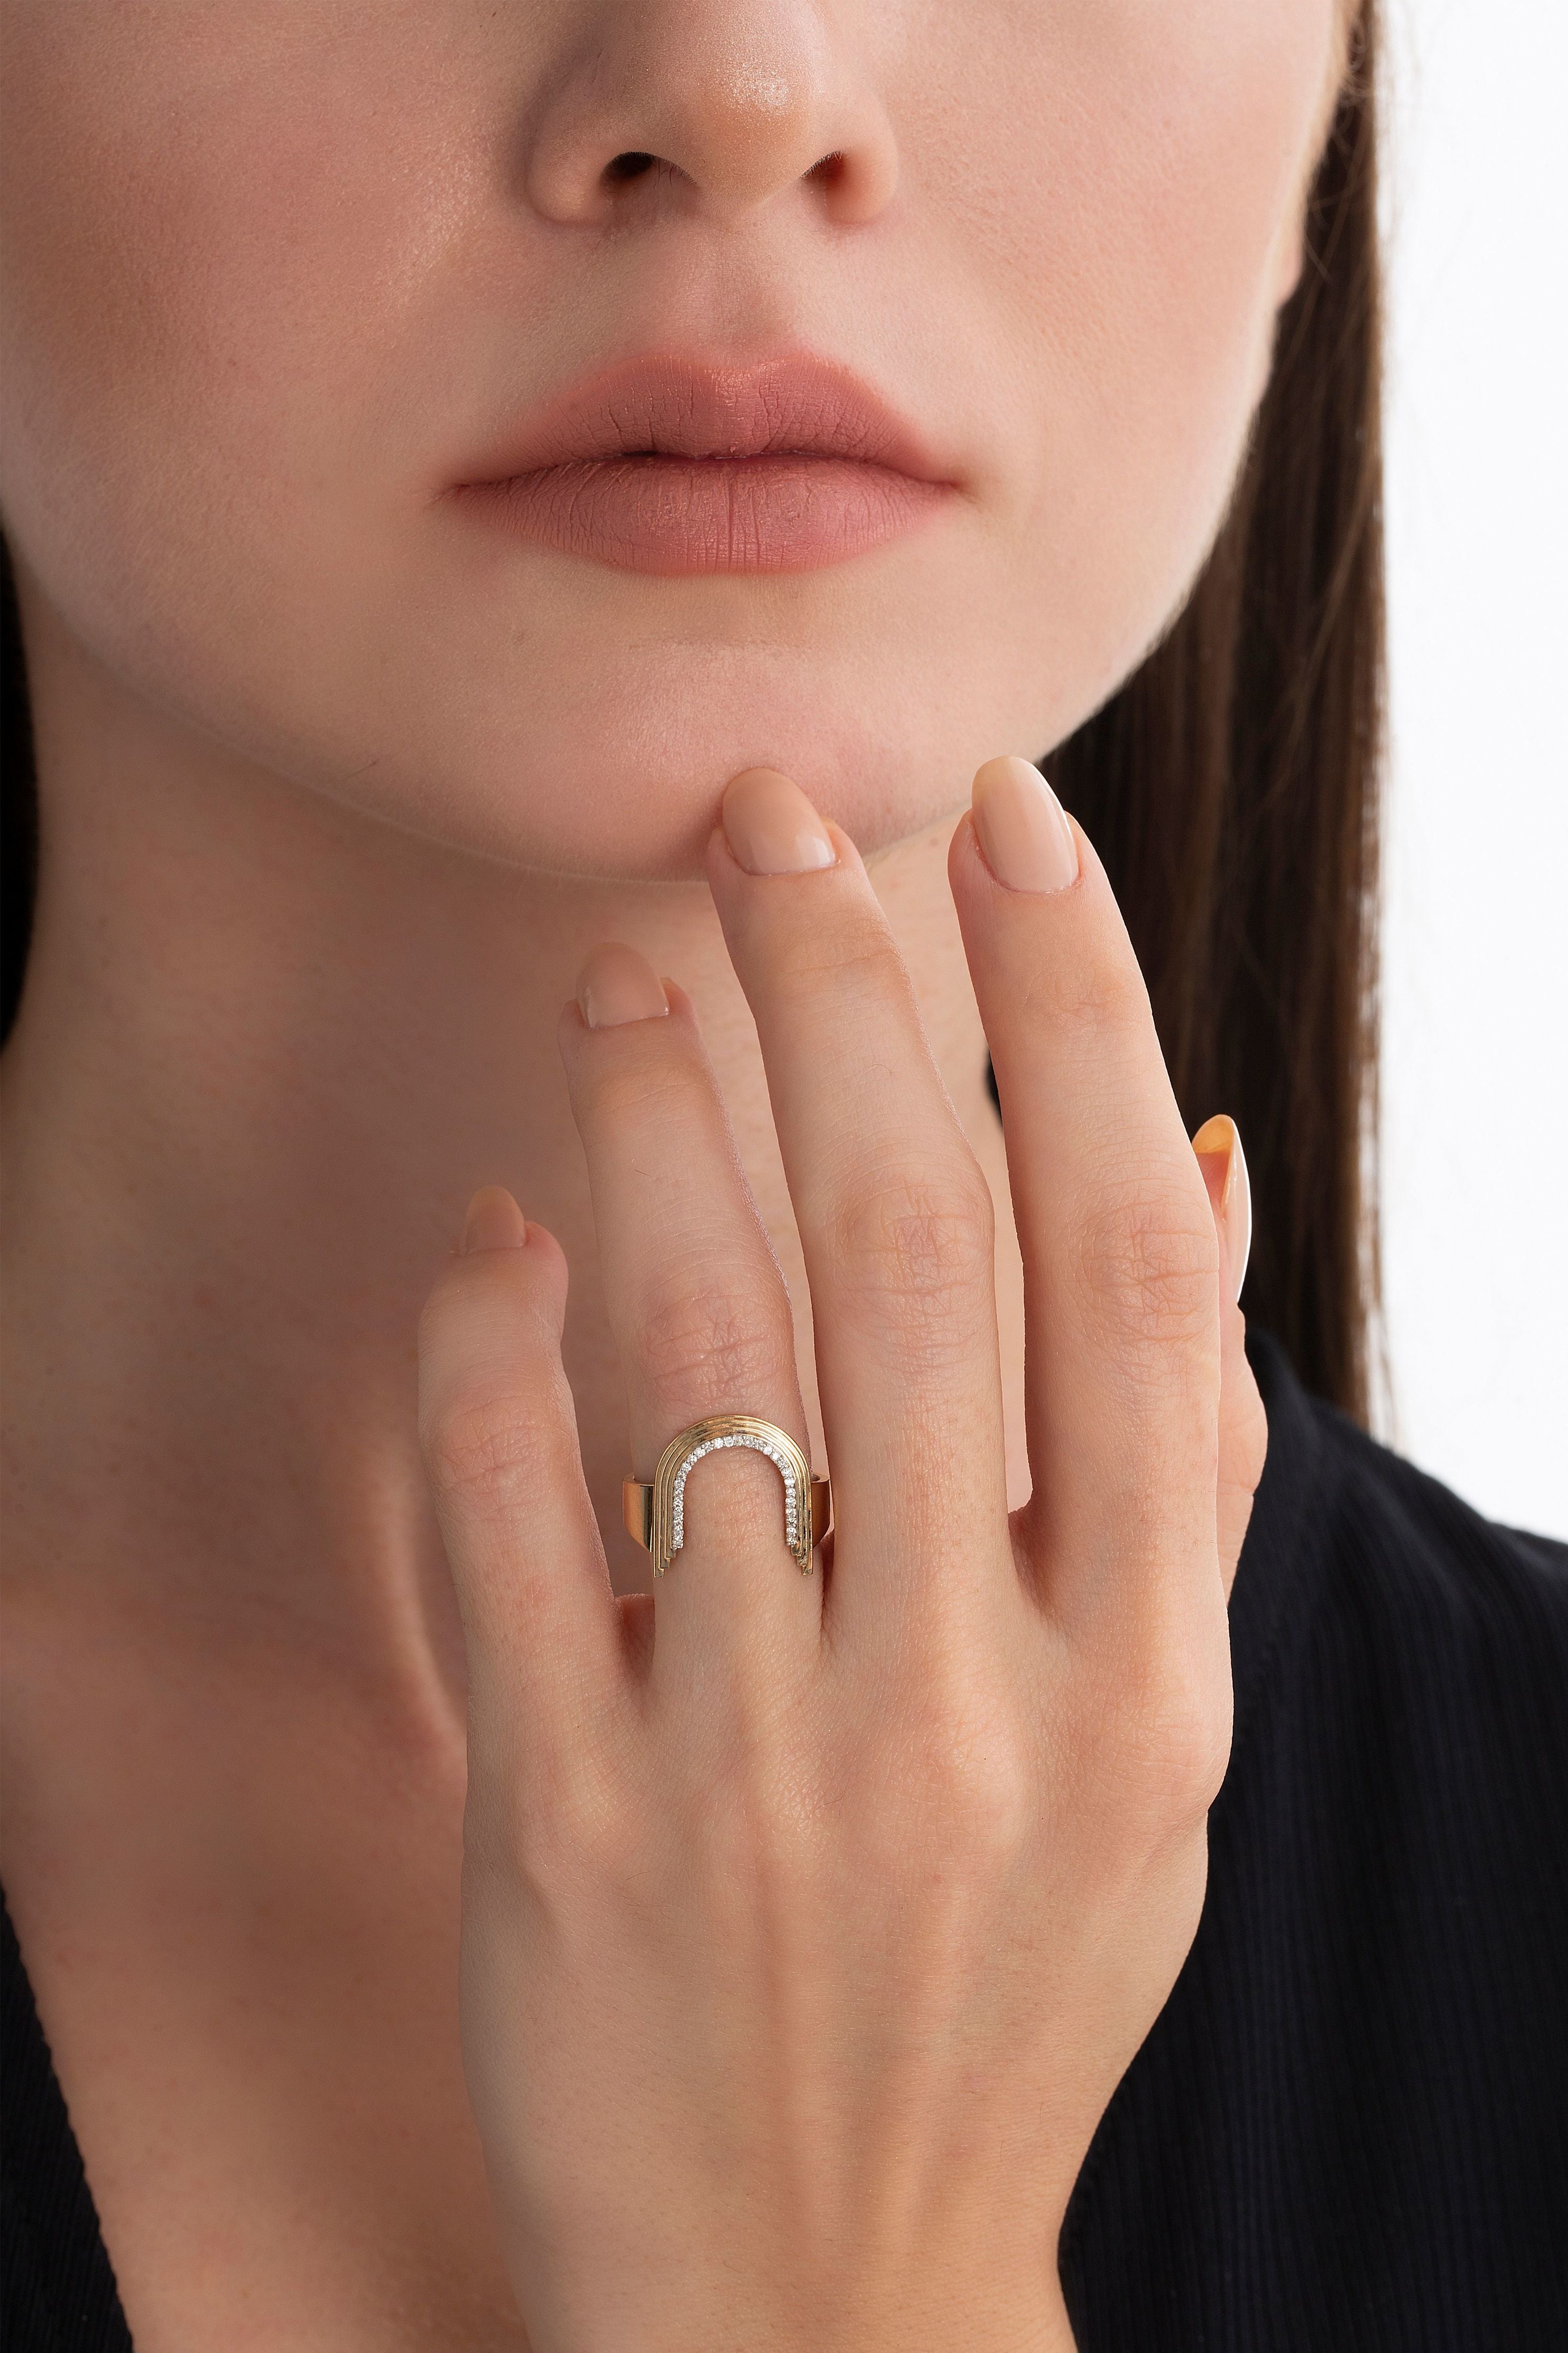 Concave Arch Ring in Yellow Gold - Her Story Shop